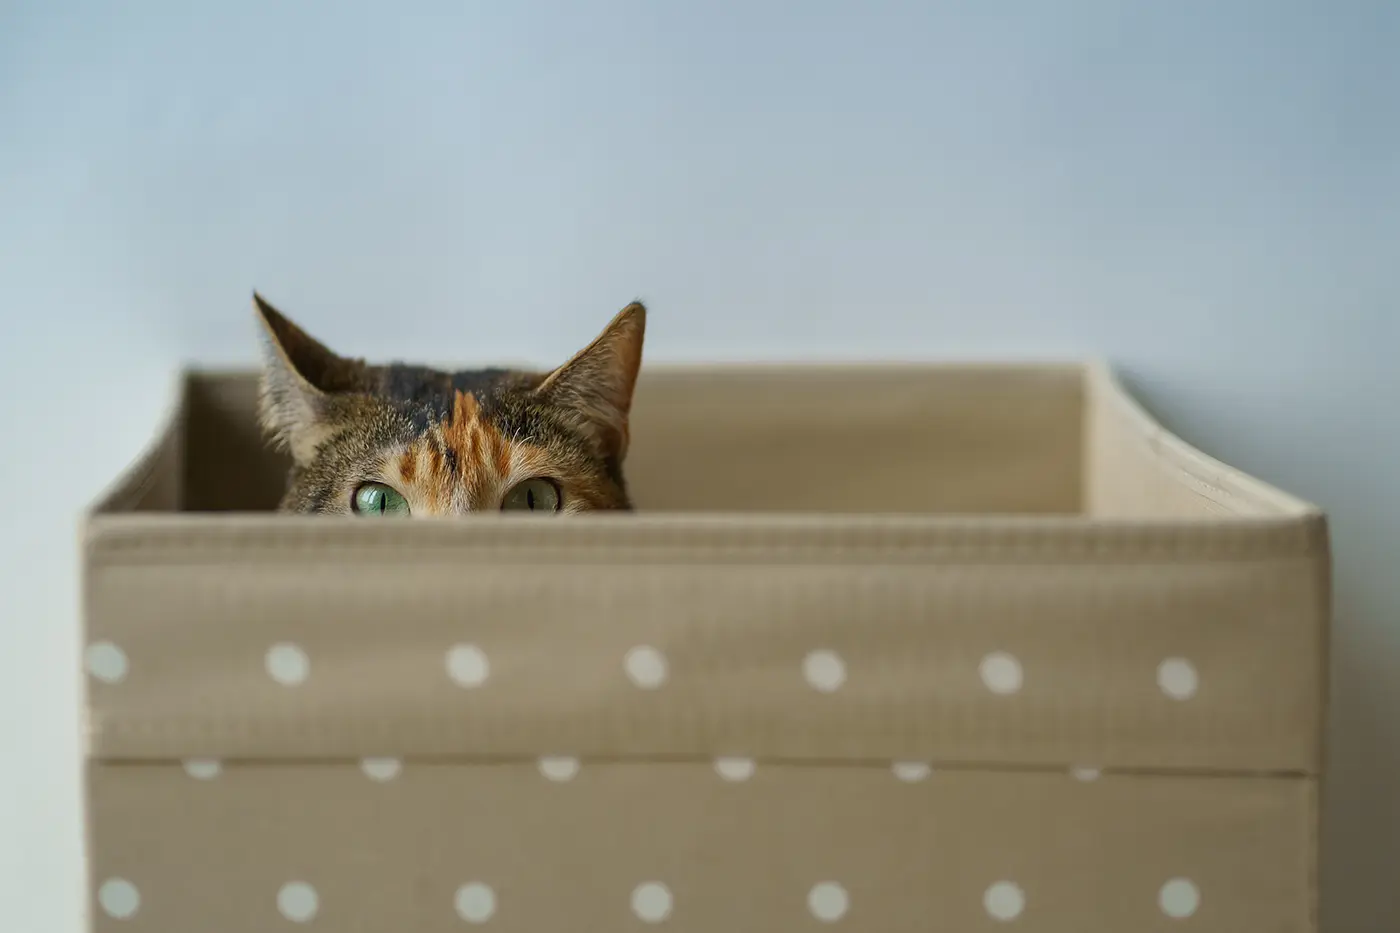 Why cats hide and what are their favorite hiding places